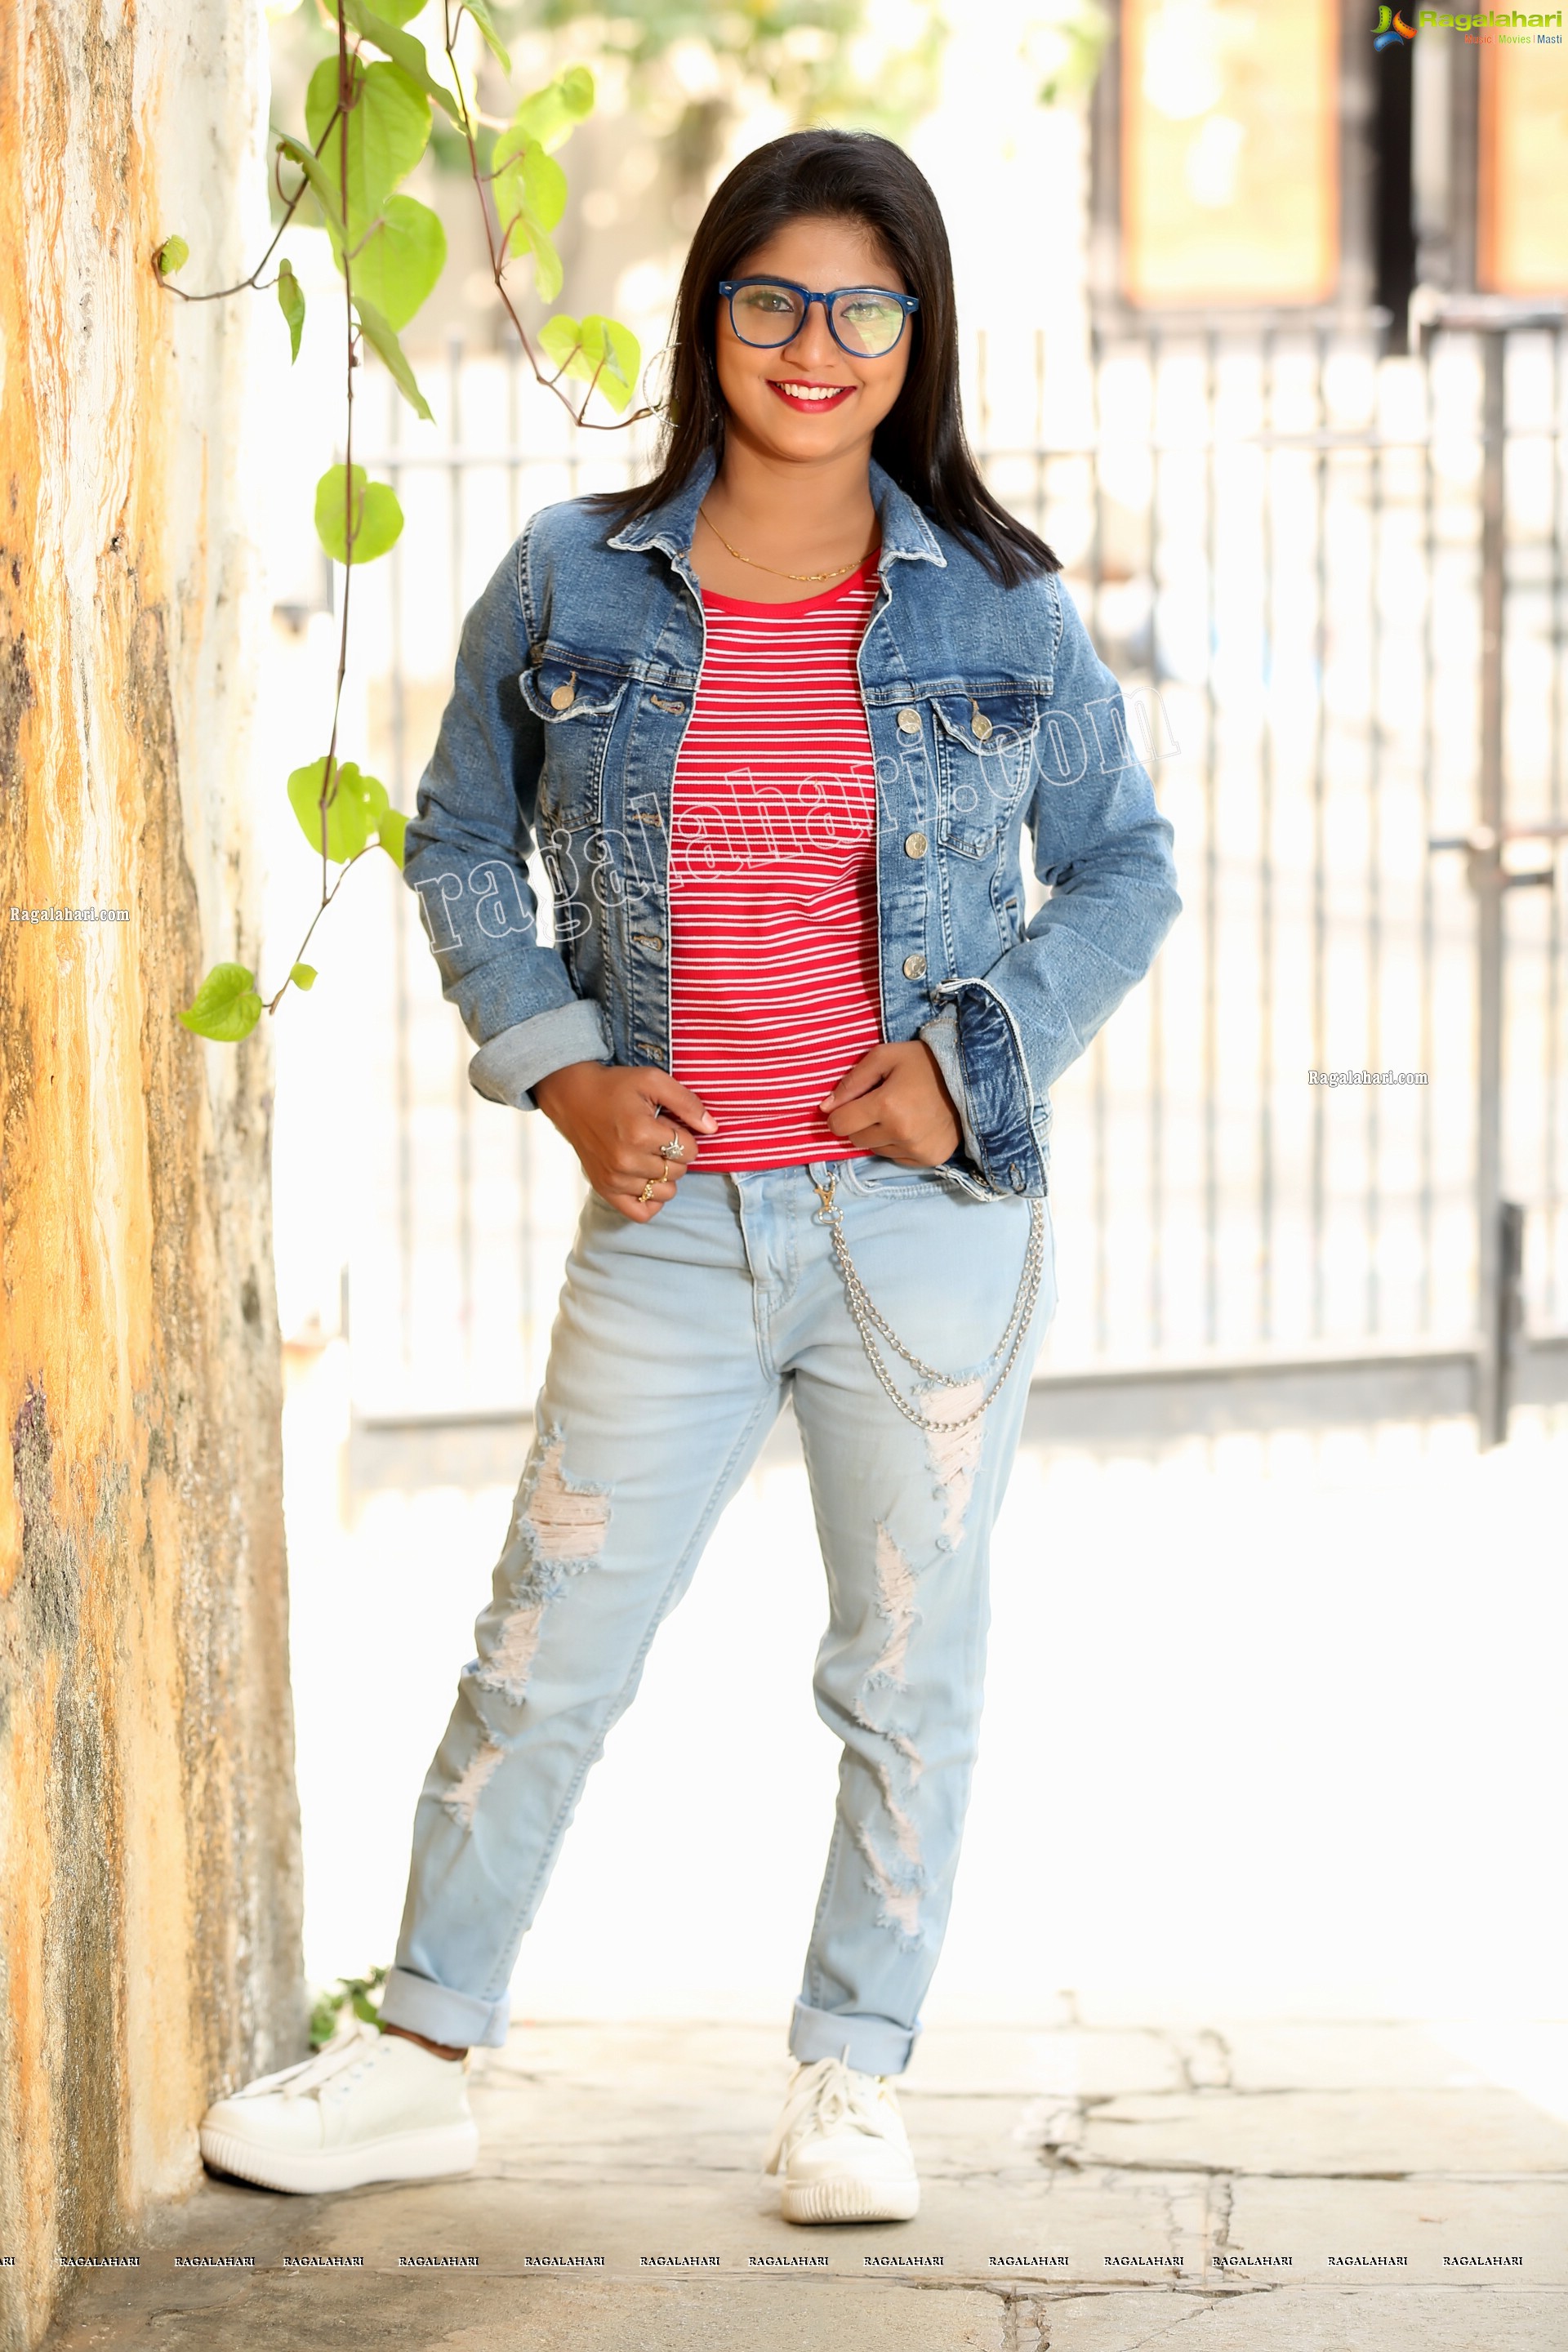 Shabeena Shaik in Trendy Denim Jacket Over Pink Striped Top with Jeans, Exclusive Photo Shoot